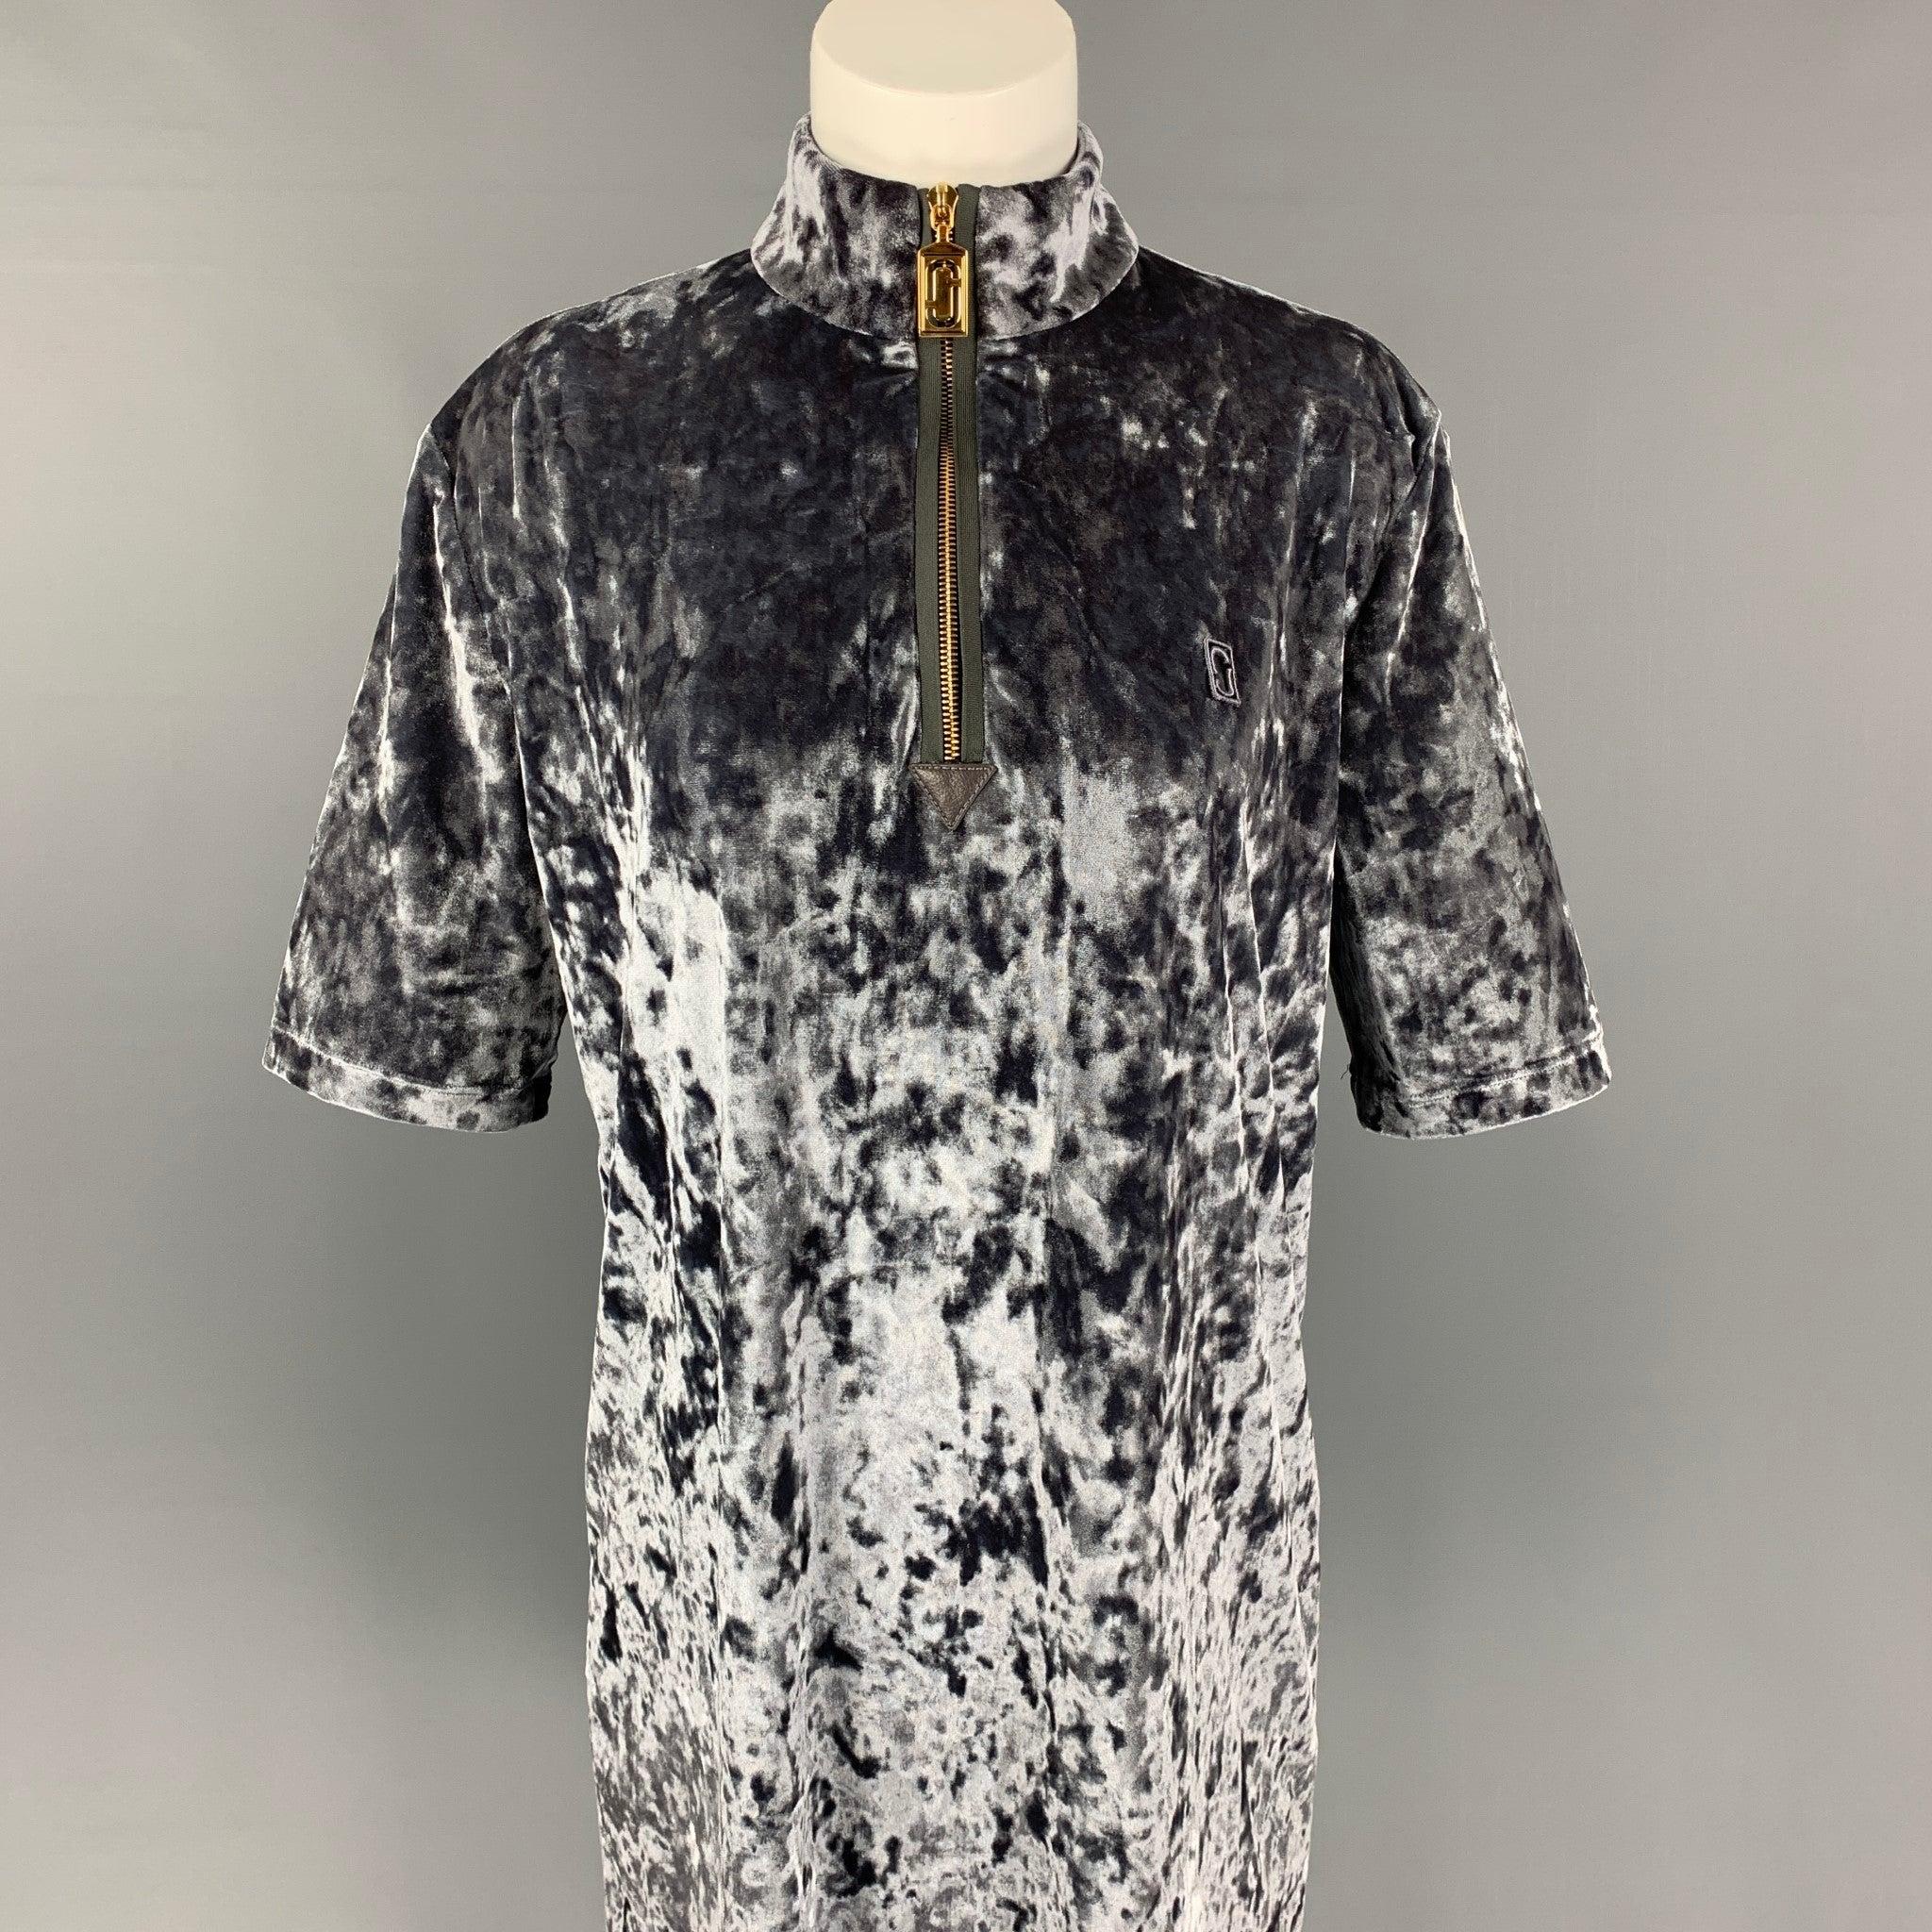 MARC JACOBS dress comes in a dark gray metallic polyester featuring a high collar, gold tone hardware, short sleeves, and a half zip closure.
Very Good
Pre-Owned Condition. 

Marked:   4 

Measurements: 
 
Shoulder: 17 inches  Bust: 38 inches 